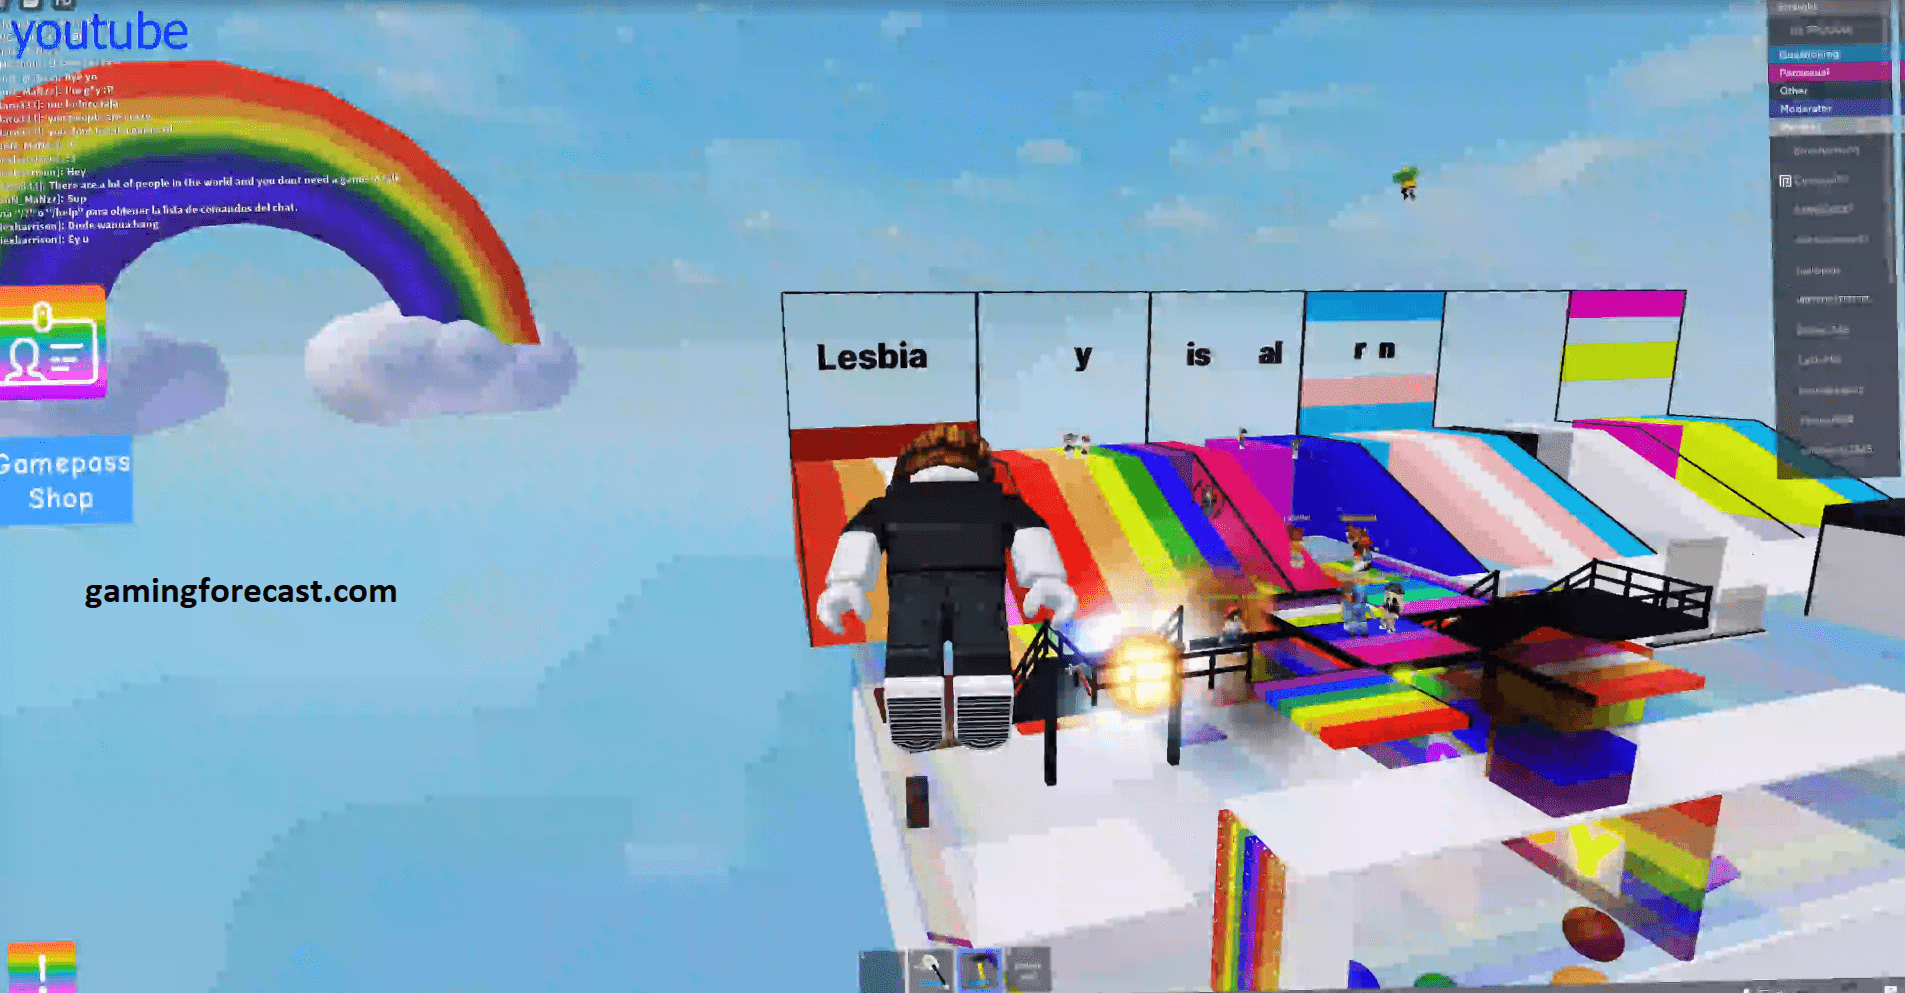 Roblox Hack Download Pc Destroy Lobby Fly Aimbot Scripts 2021 Gaming Forecast Download Free Online Game Hacks - hacks roblox jailbreak download